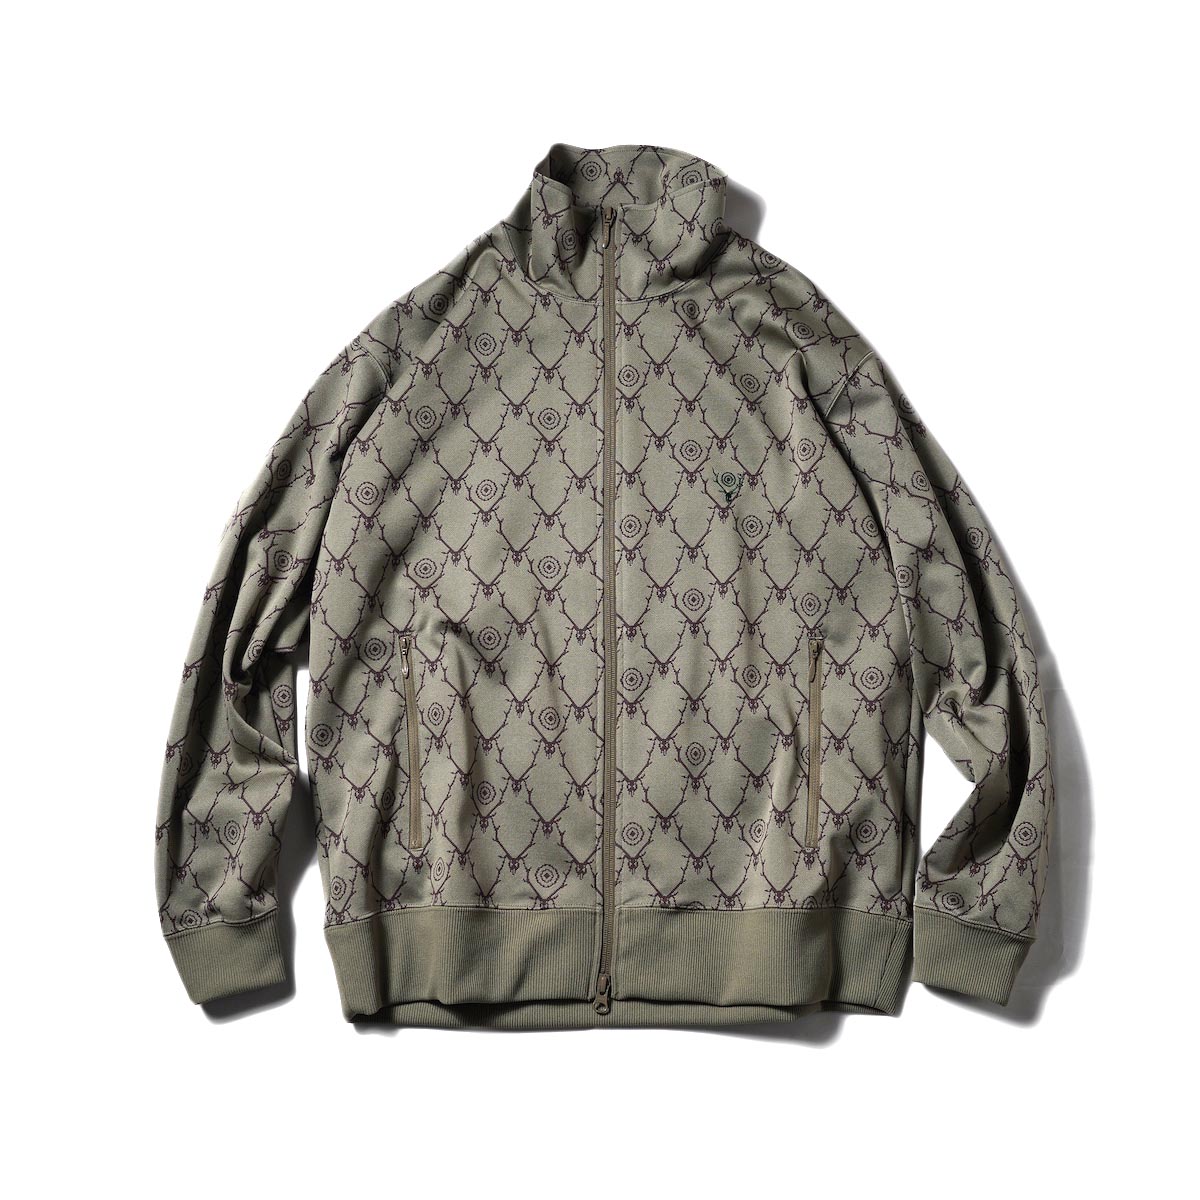 South2 West8 South2 West8 / Trainer Jacket -Poly Jq (Khaki)/ Trainer Jacket -Poly Jq (Black)